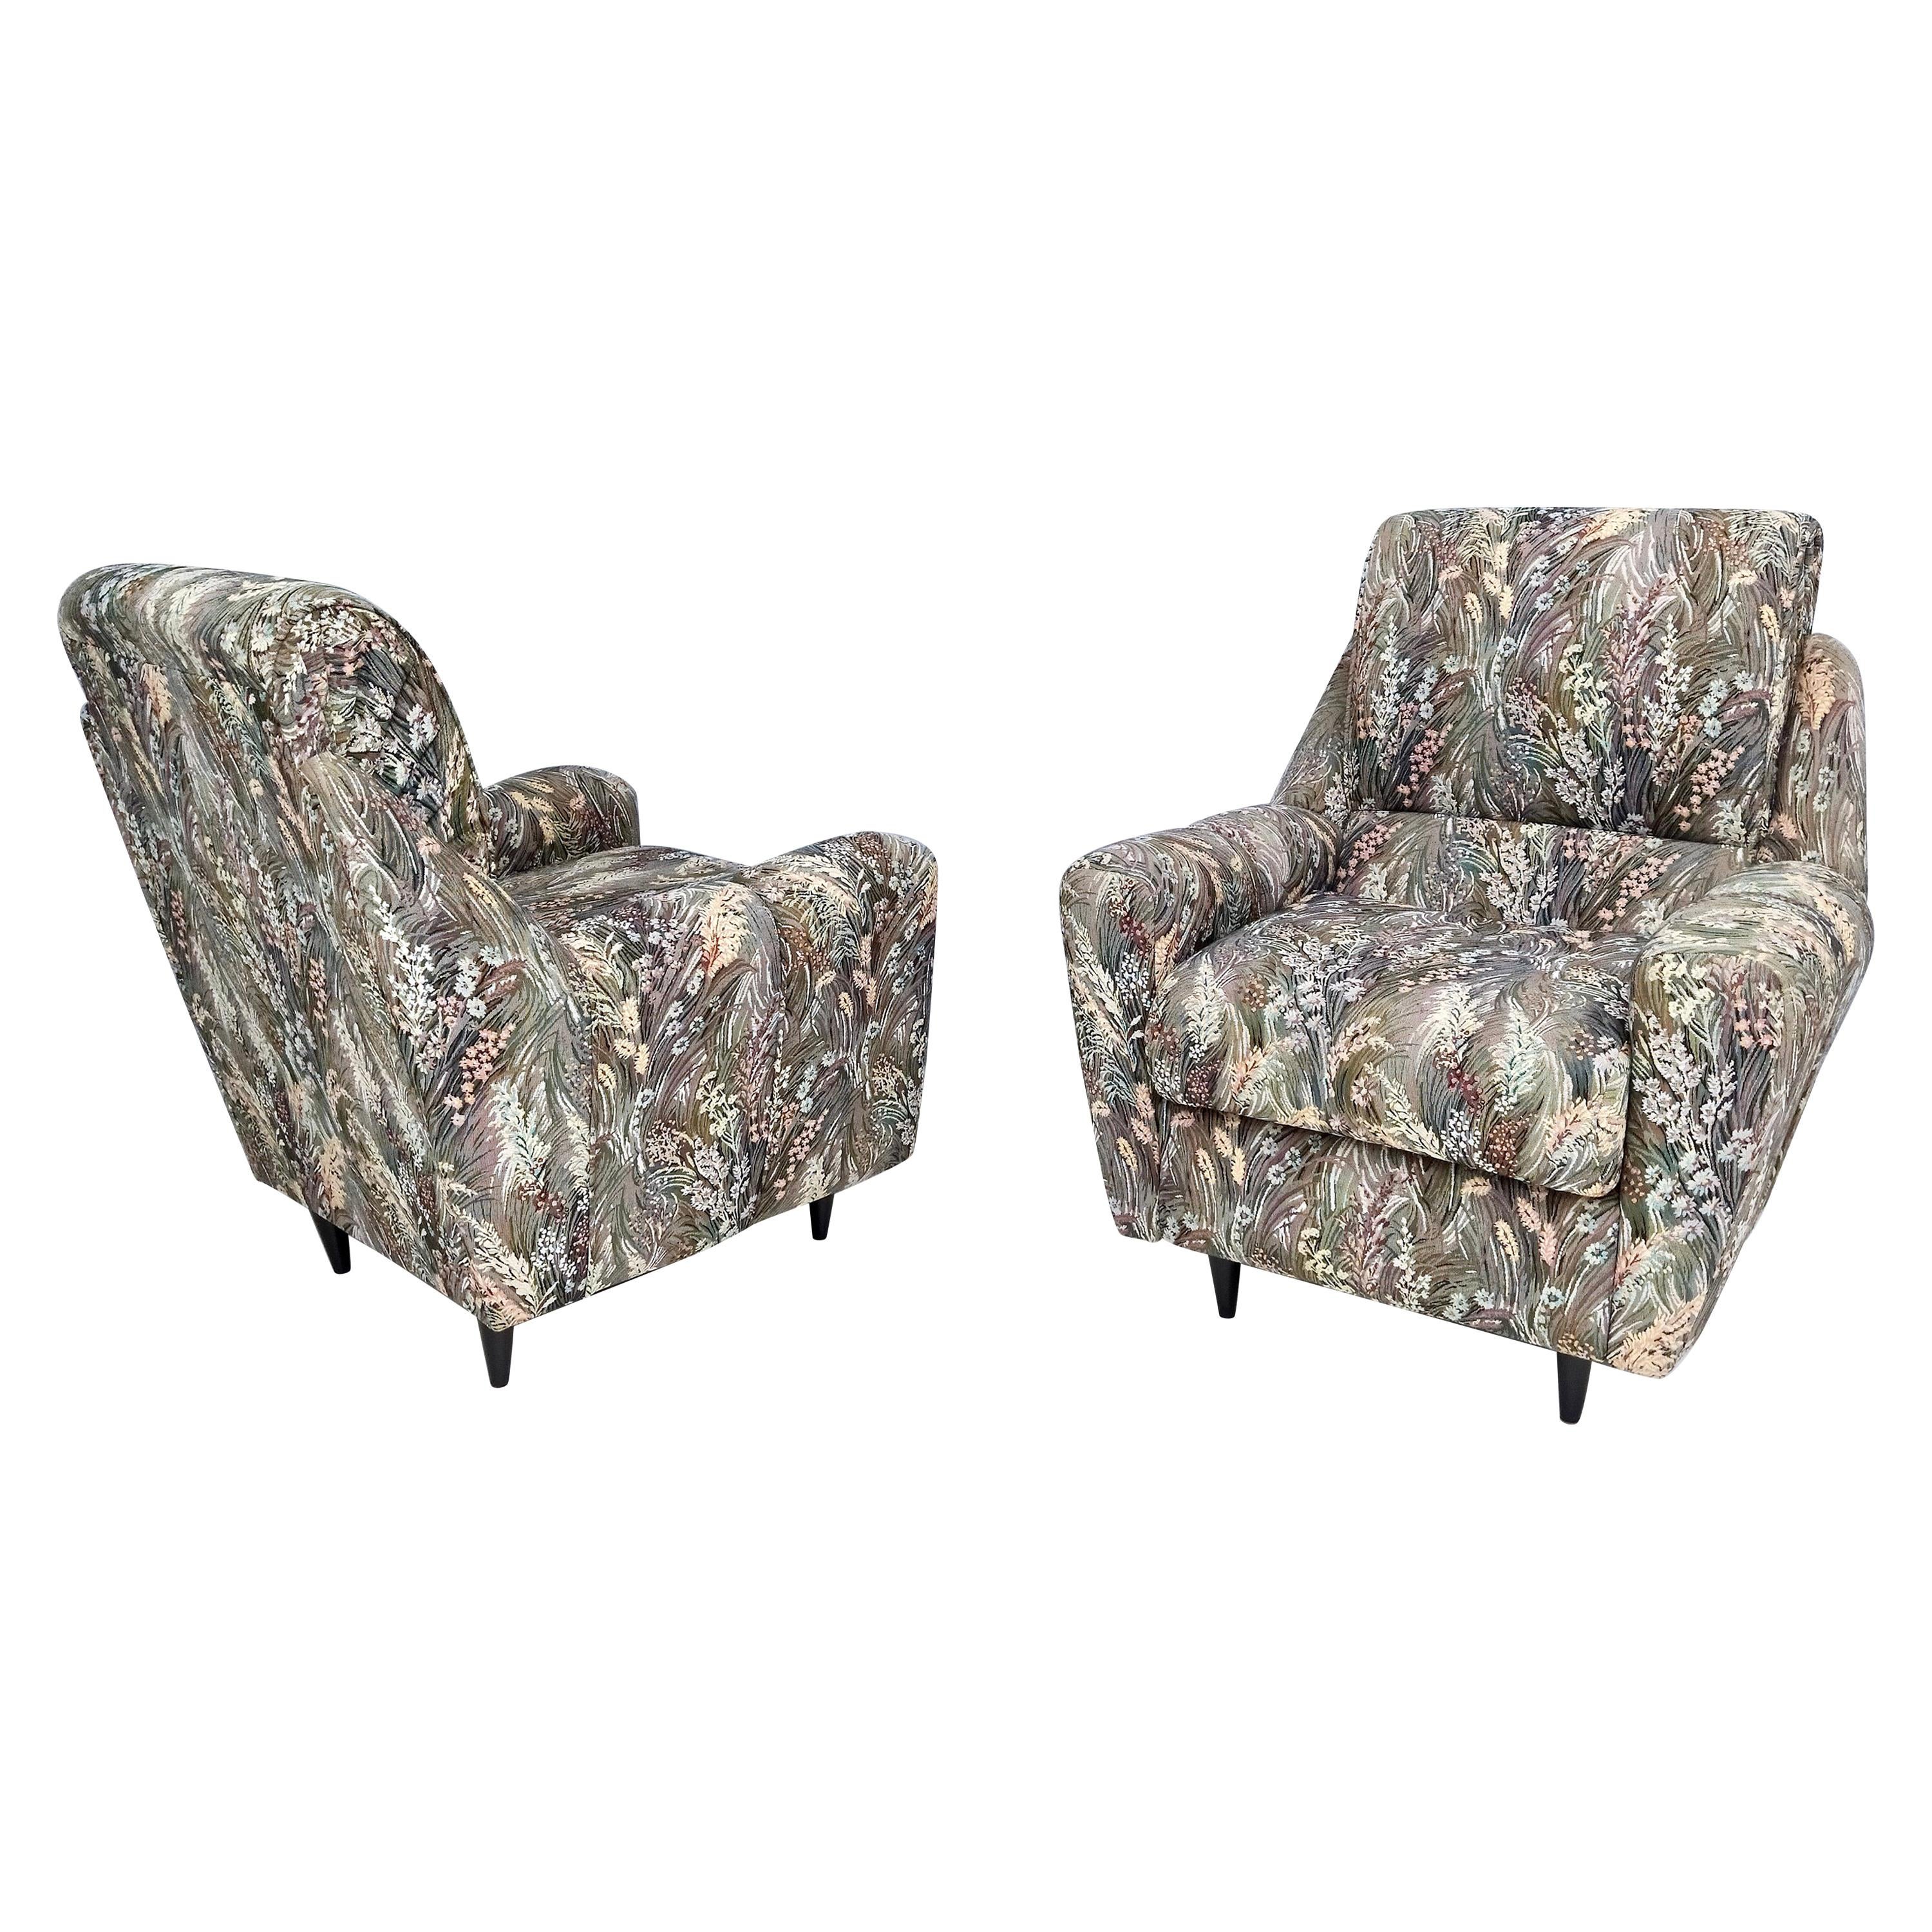 Pair of Vintage High-Quality Patterned Fabric Armchairs, Italy For Sale